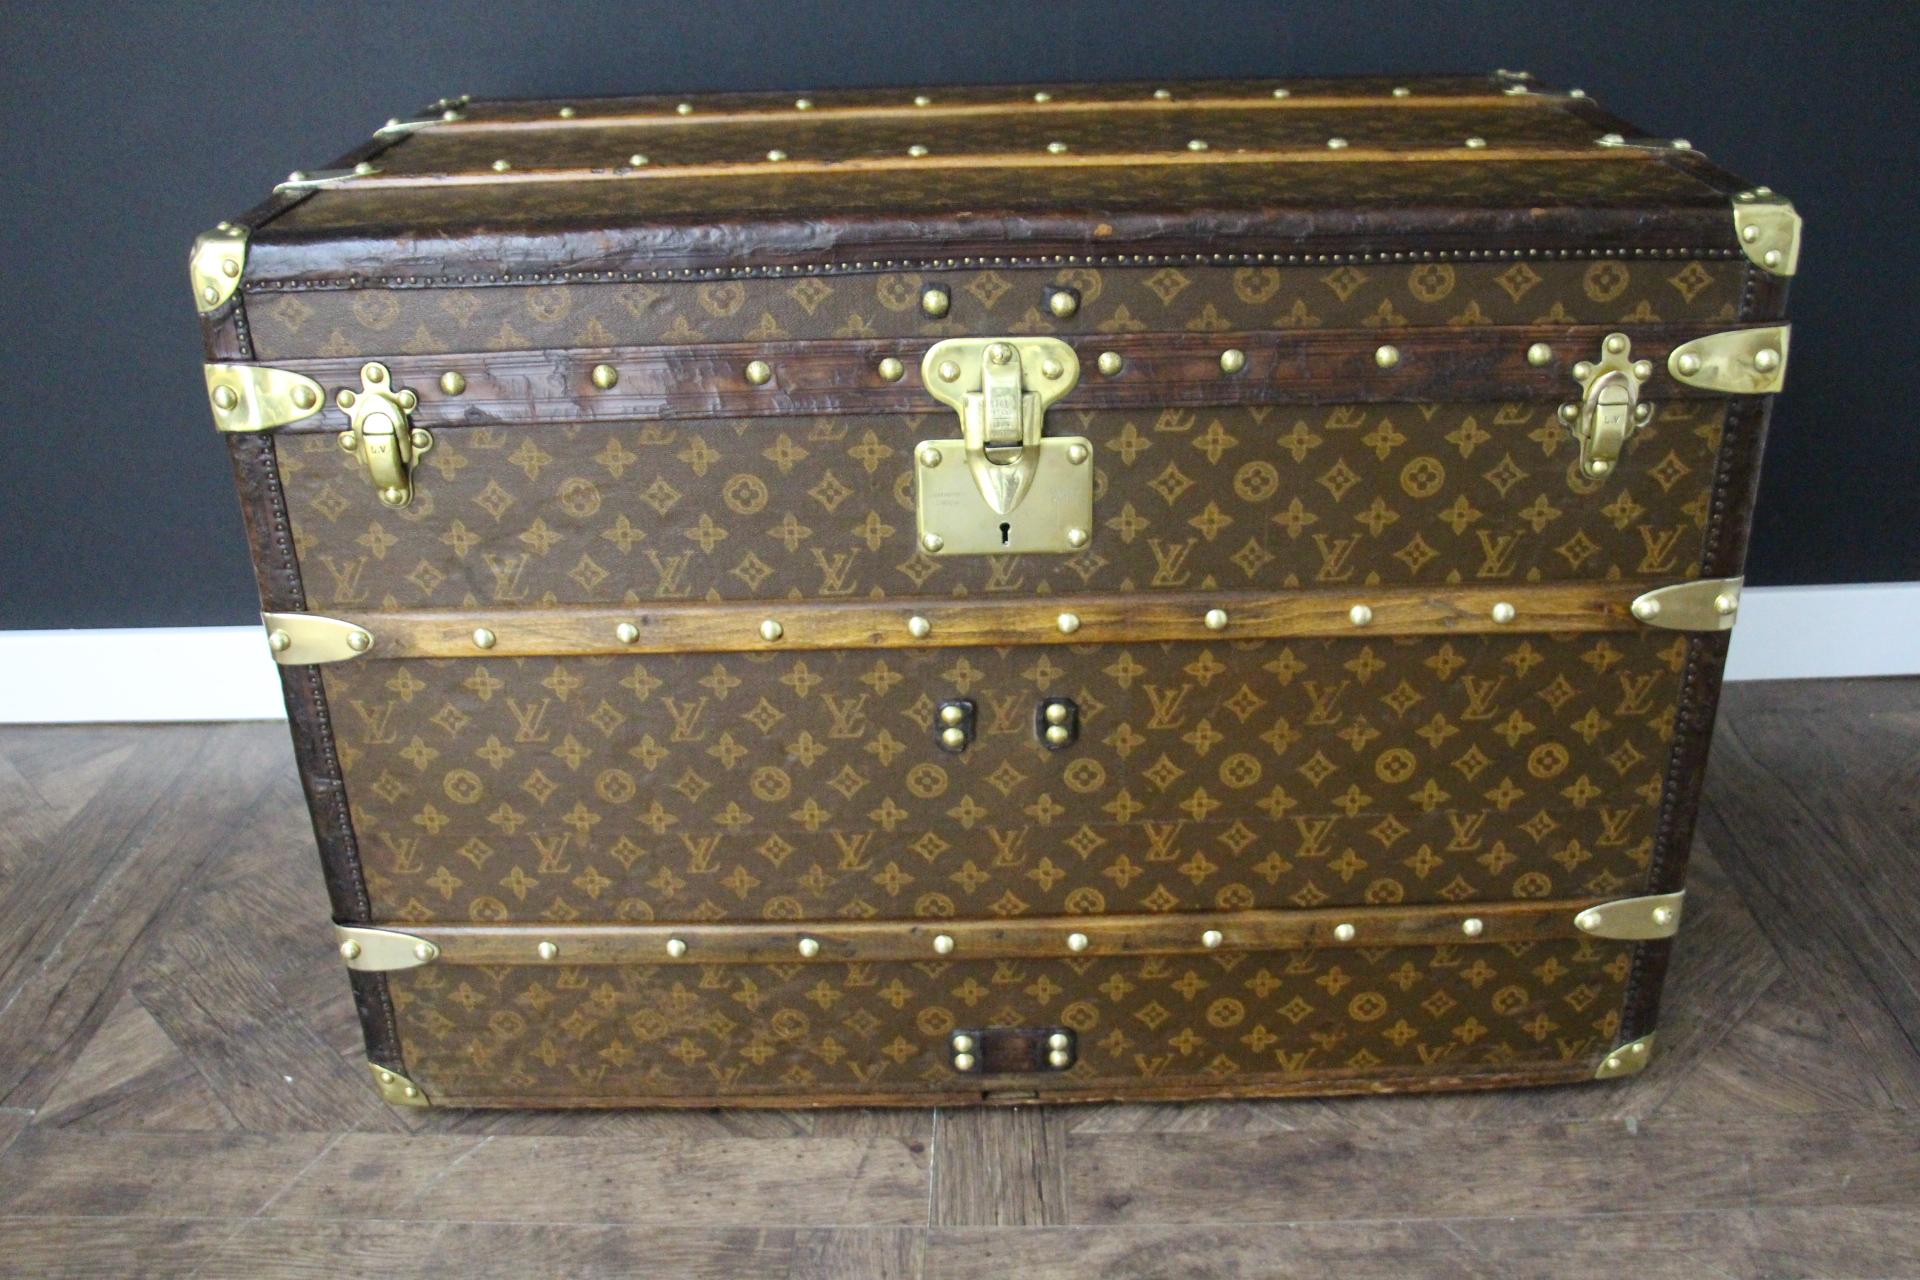 Superb Louis Vuitton steamer trunk featuring stenciled canvas, all leather trim in deep chocolate color, solid brass Louis Vuitton stamped clasps, lock and studs, solid brass corners and solid brass LV stamped side handles. Measure: 75 cm
Customized